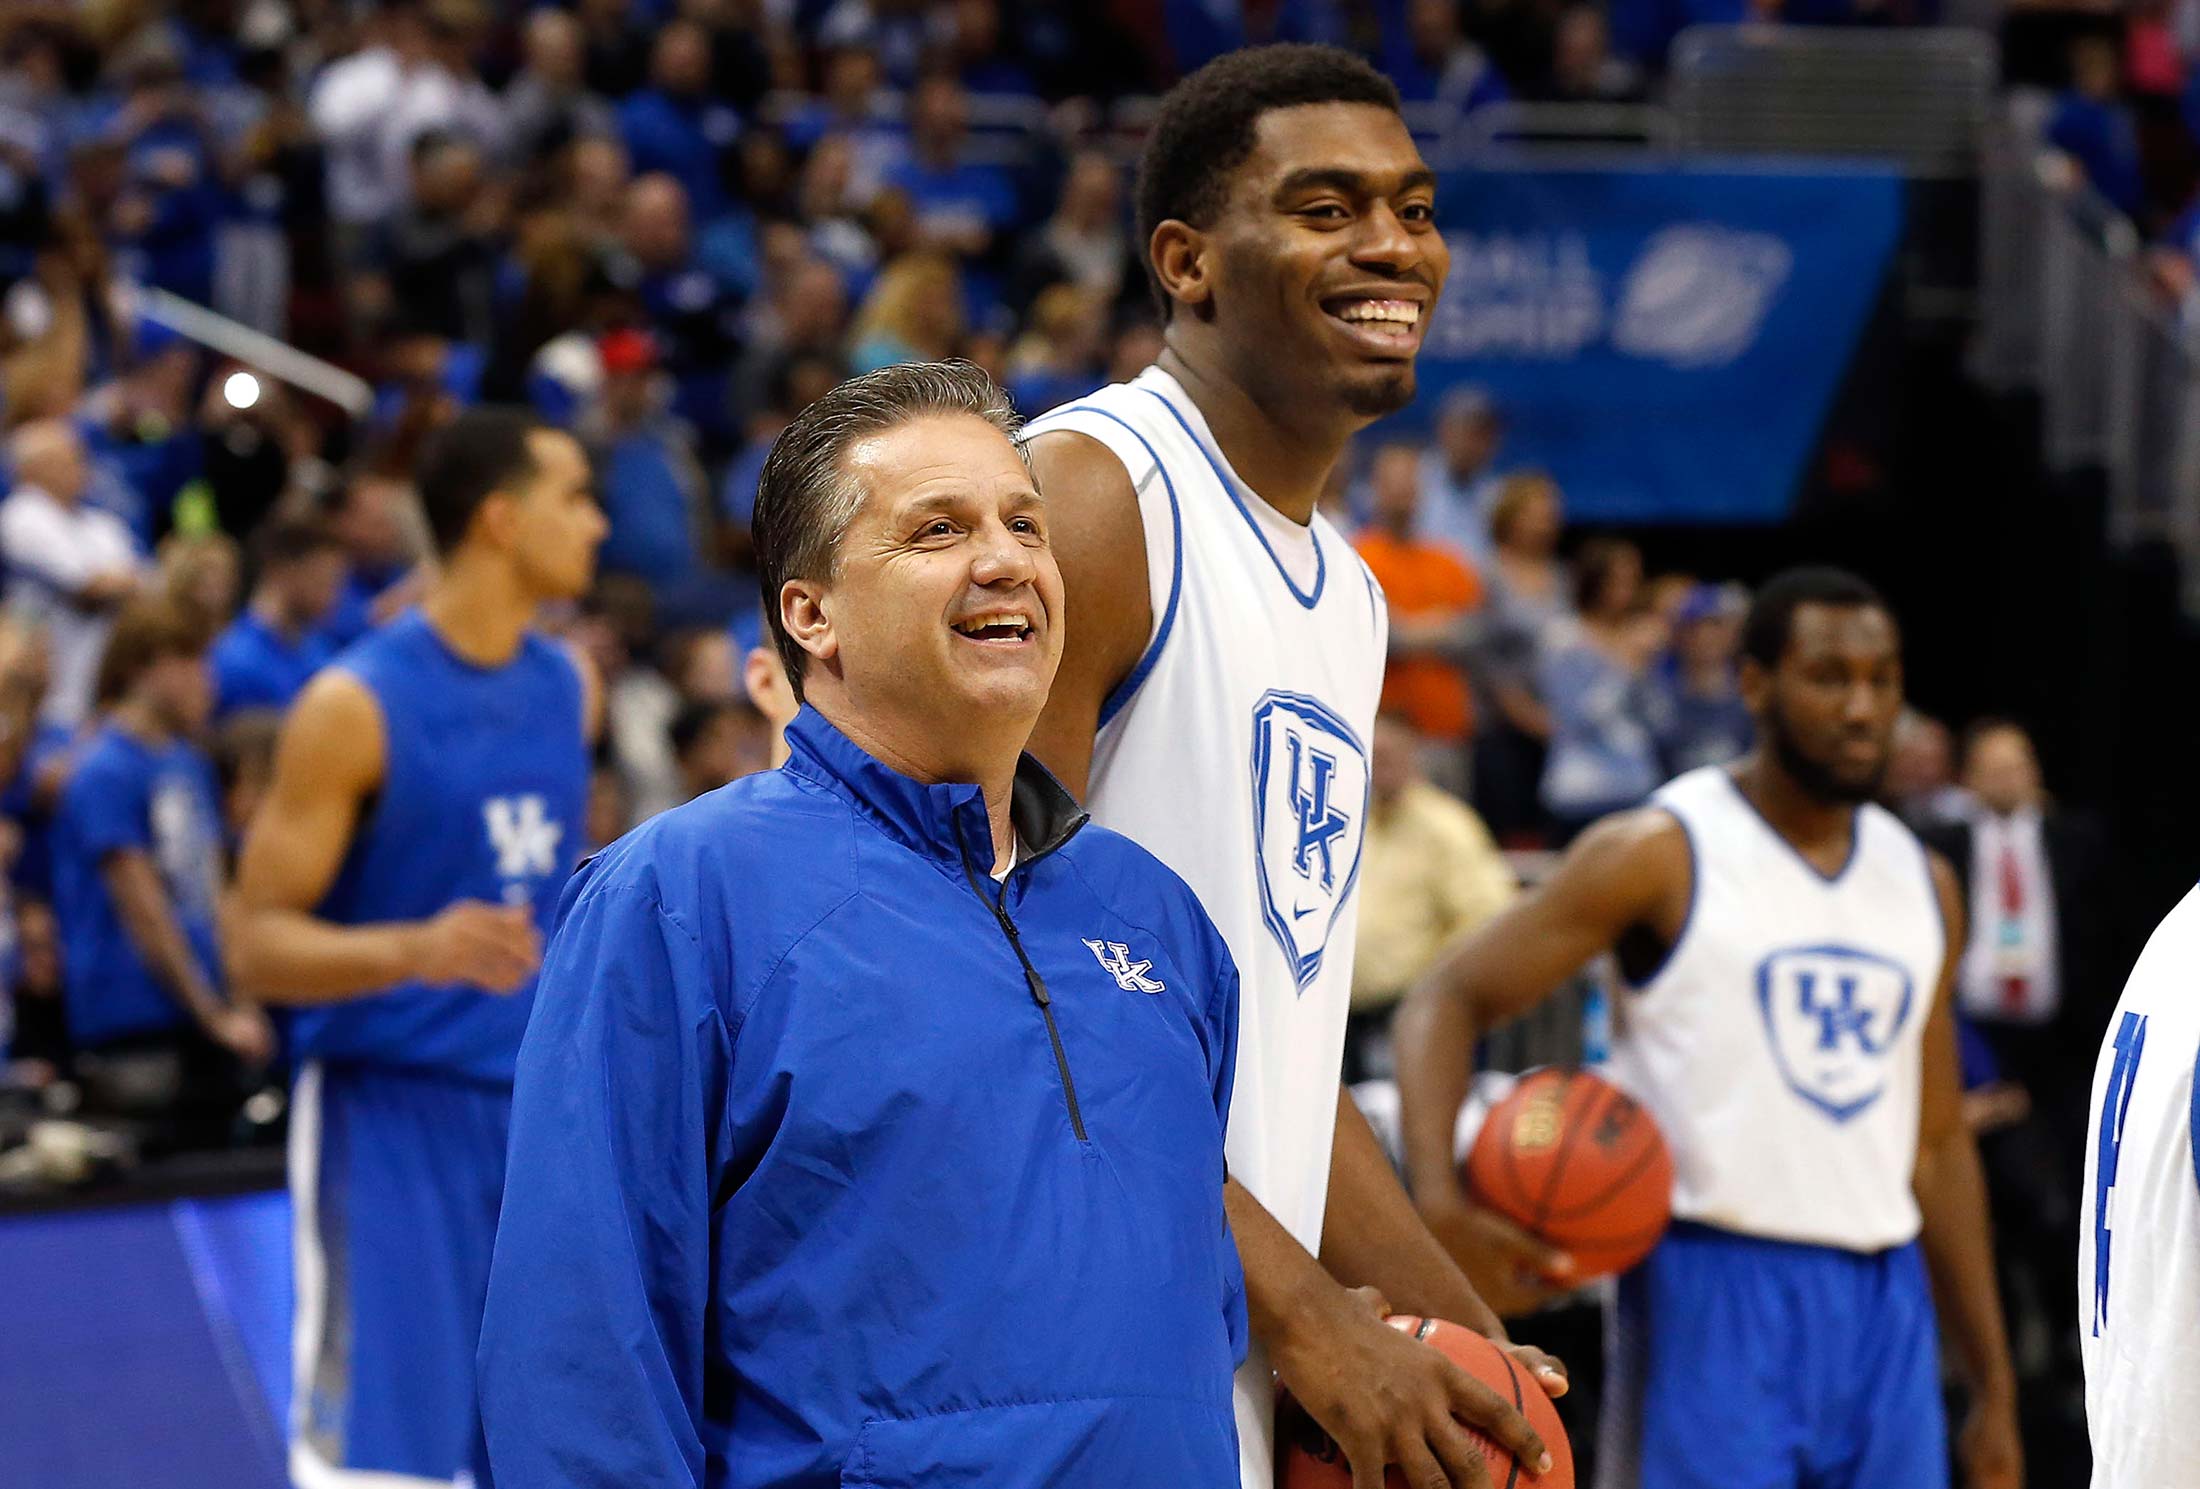 It takes time': Coach Calipari talks about his team after win over  Louisville